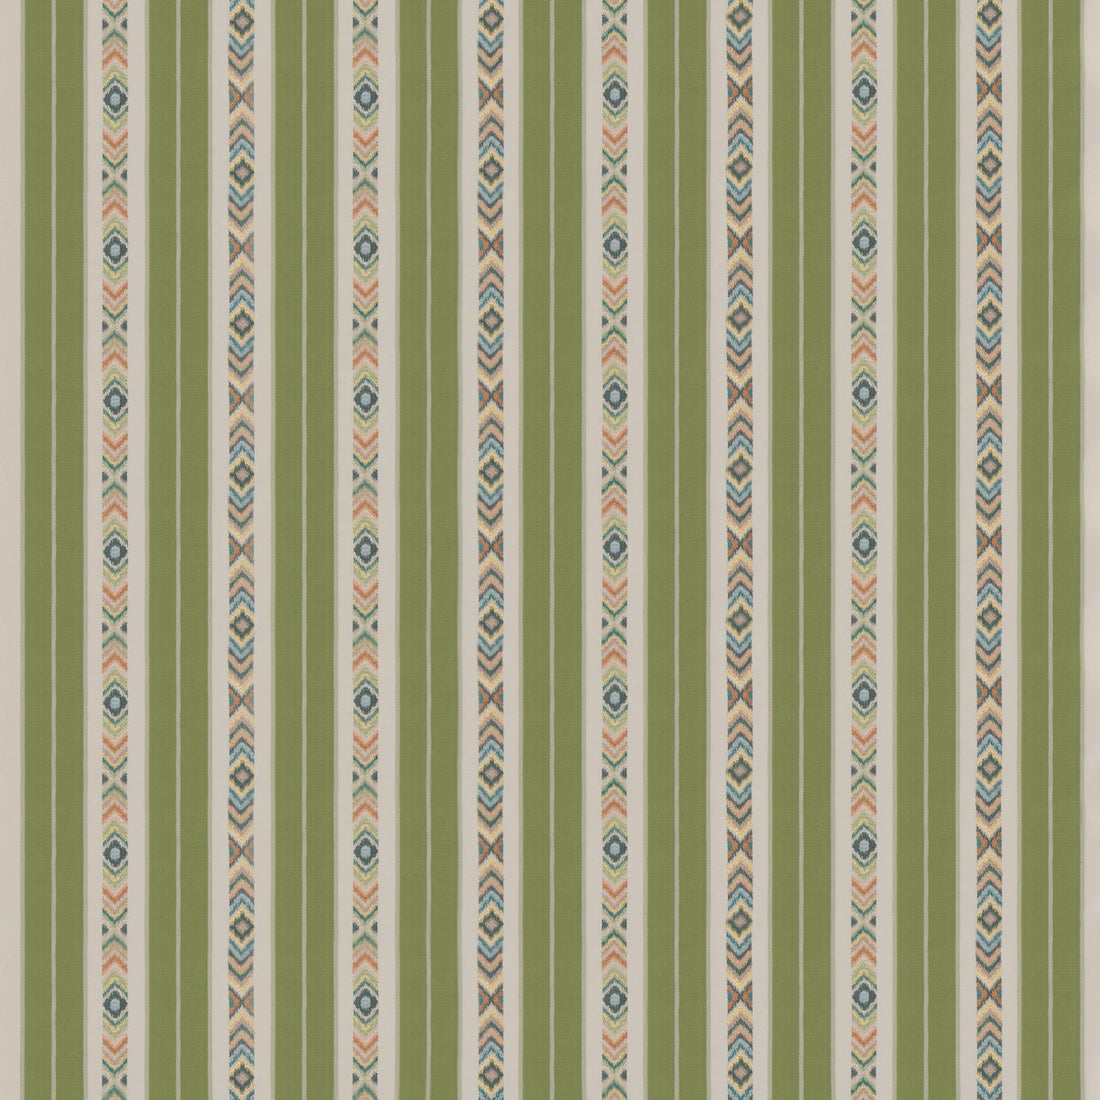 Ashlar Stripe fabric in emerald color - pattern BF10943.2.0 - by G P &amp; J Baker in the Burford collection